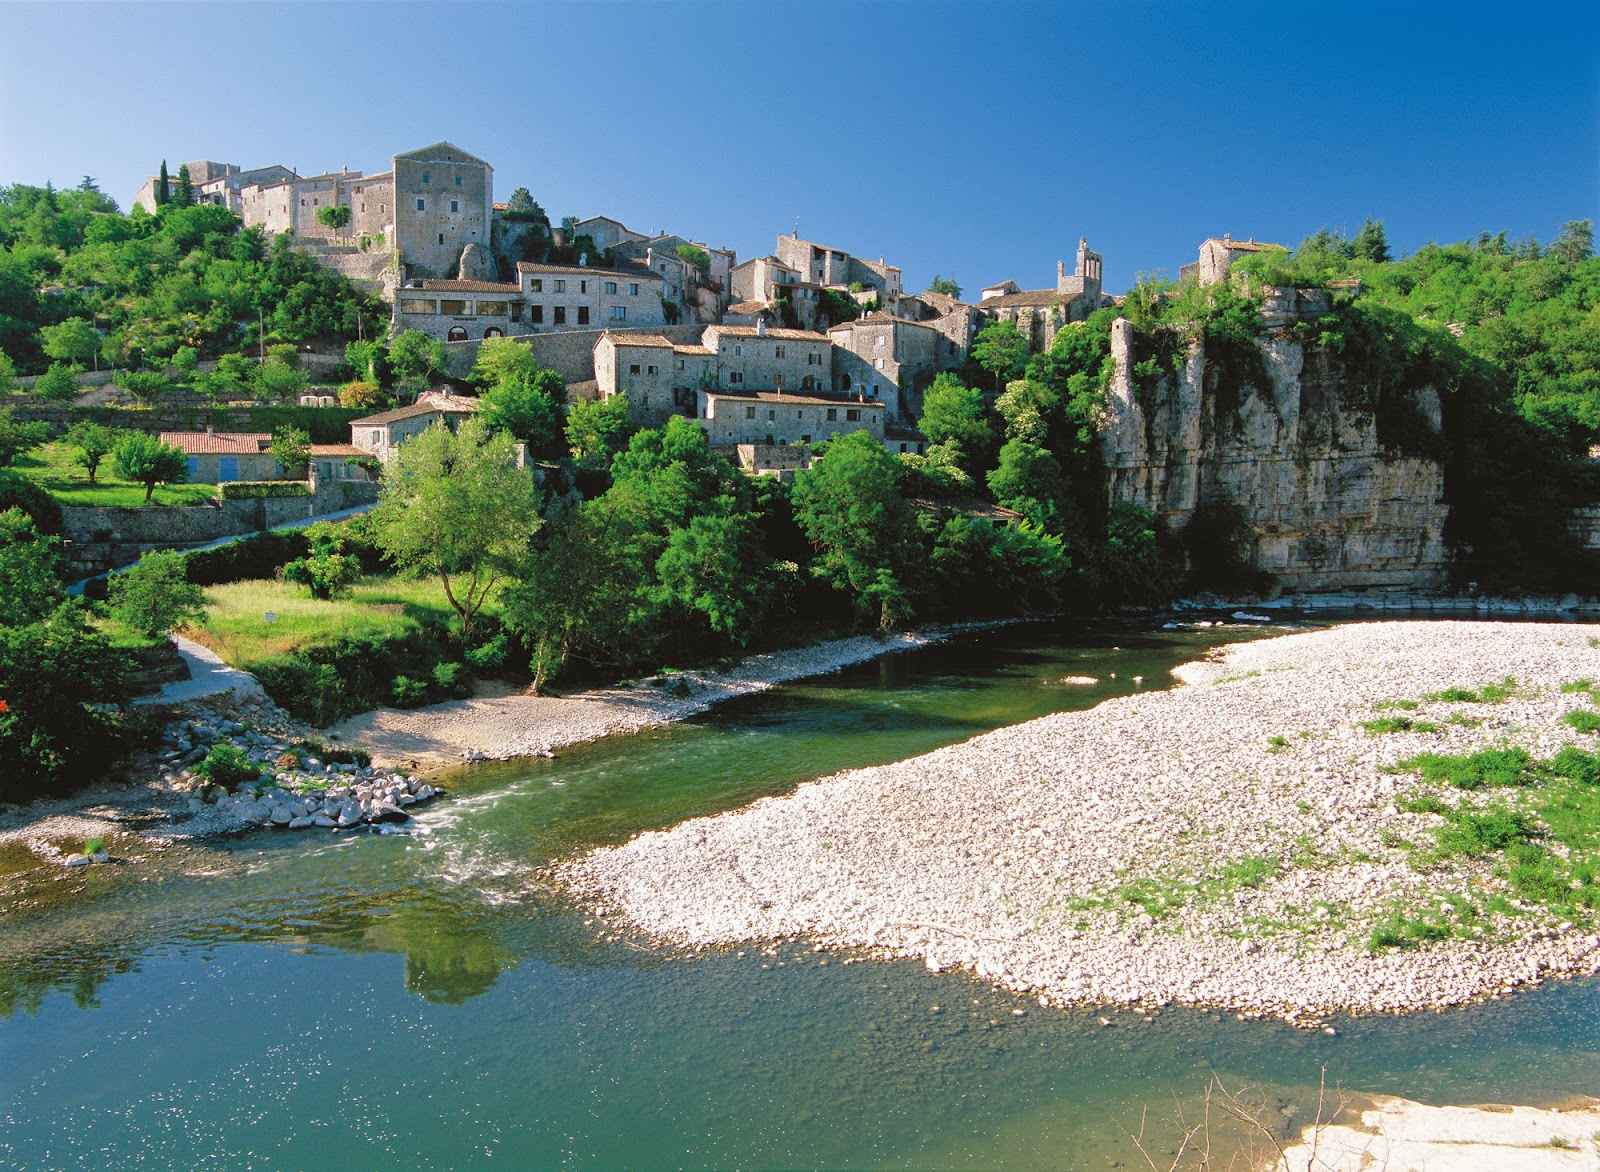 Balazuc - One of the most beautiful villages in Ardèche